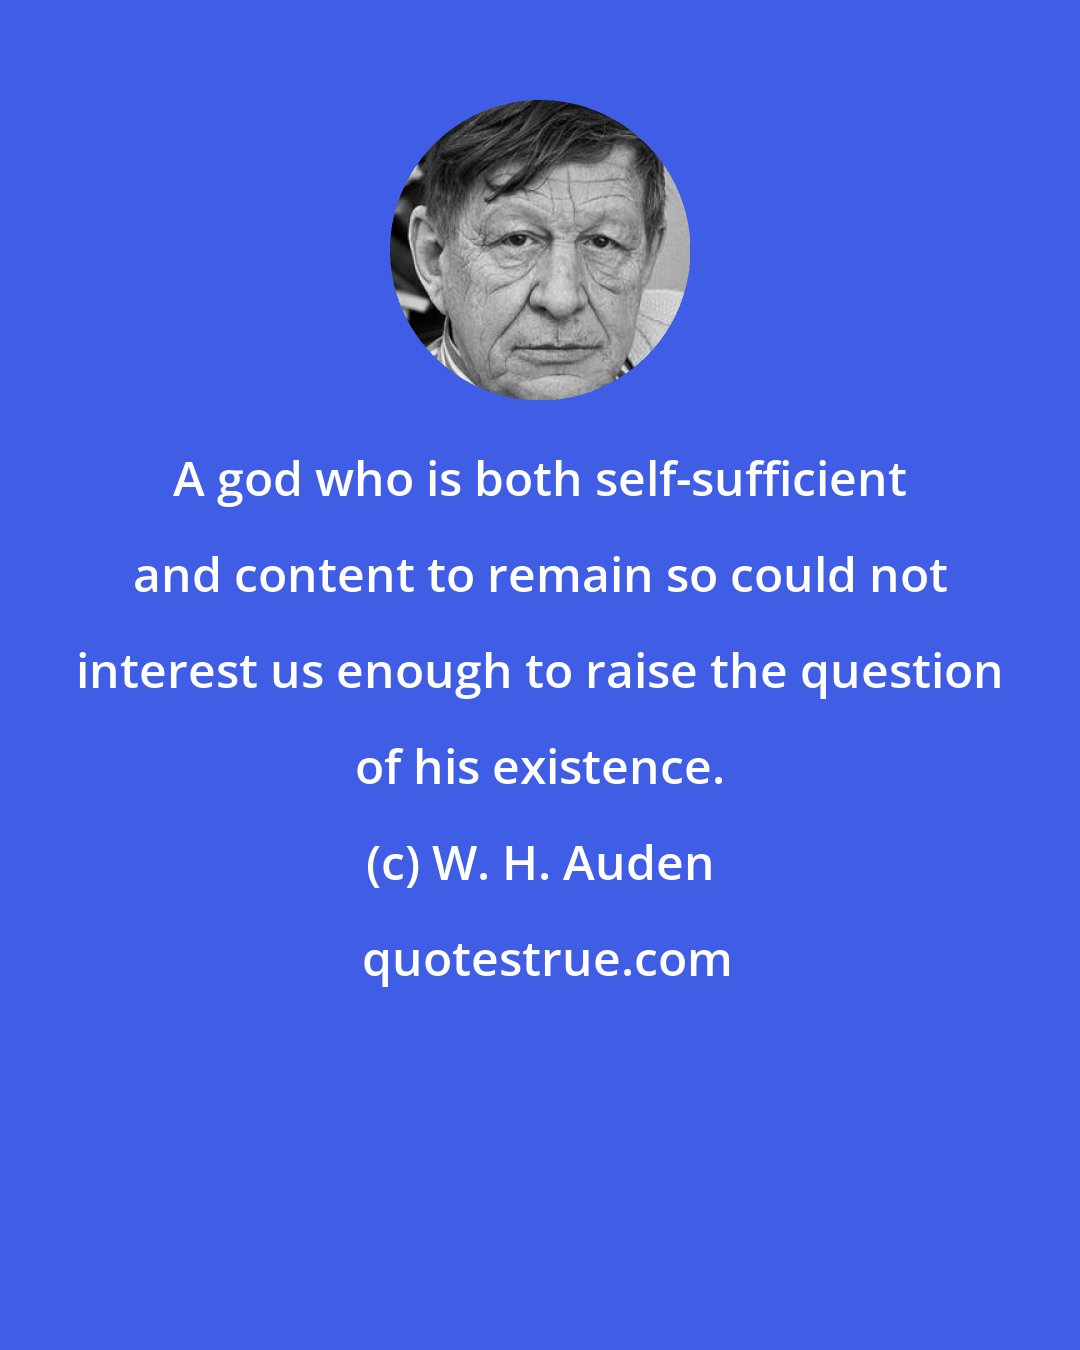 W. H. Auden: A god who is both self-sufficient and content to remain so could not interest us enough to raise the question of his existence.